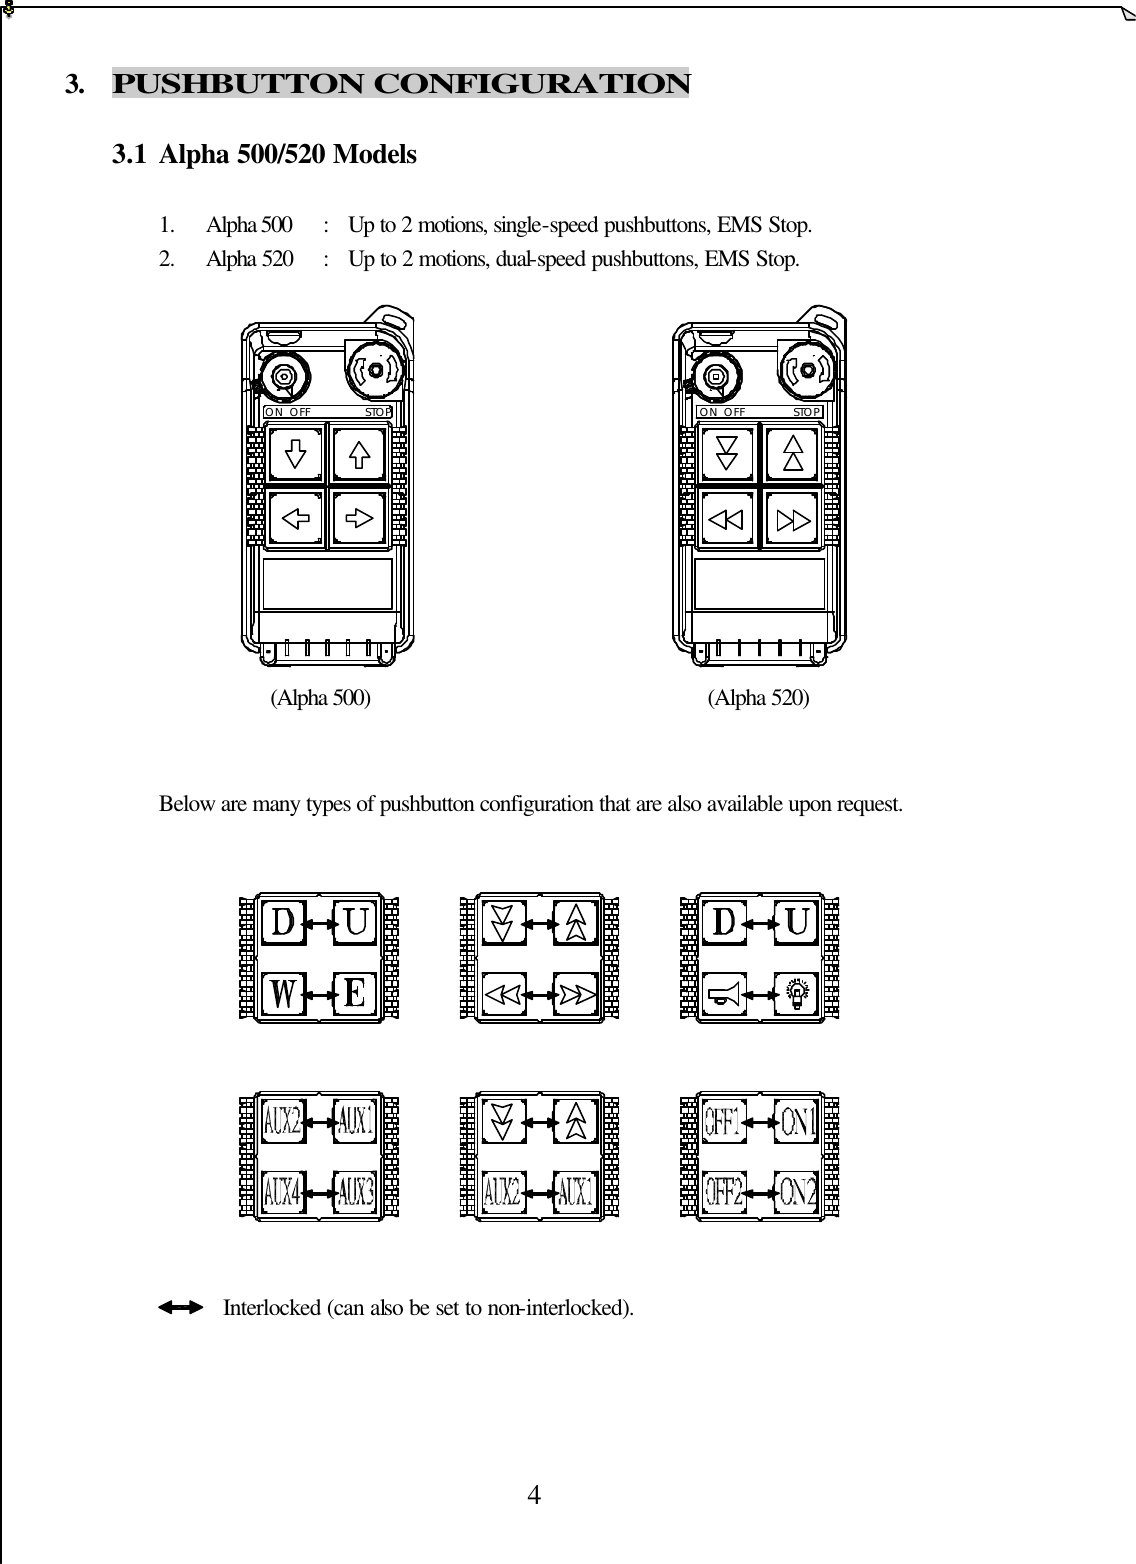  4 3. PUSHBUTTON CONFIGURATION  3.1 Alpha 500/520 Models  1. Alpha 500  :  Up to 2 motions, single-speed pushbuttons, EMS Stop.  2. Alpha 520  :  Up to 2 motions, dual-speed pushbuttons, EMS Stop.                                      (Alpha 500)                   (Alpha 520)   Below are many types of pushbutton configuration that are also available upon request.             Interlocked (can also be set to non-interlocked).     ON  OFF STOP STOPON  OFF